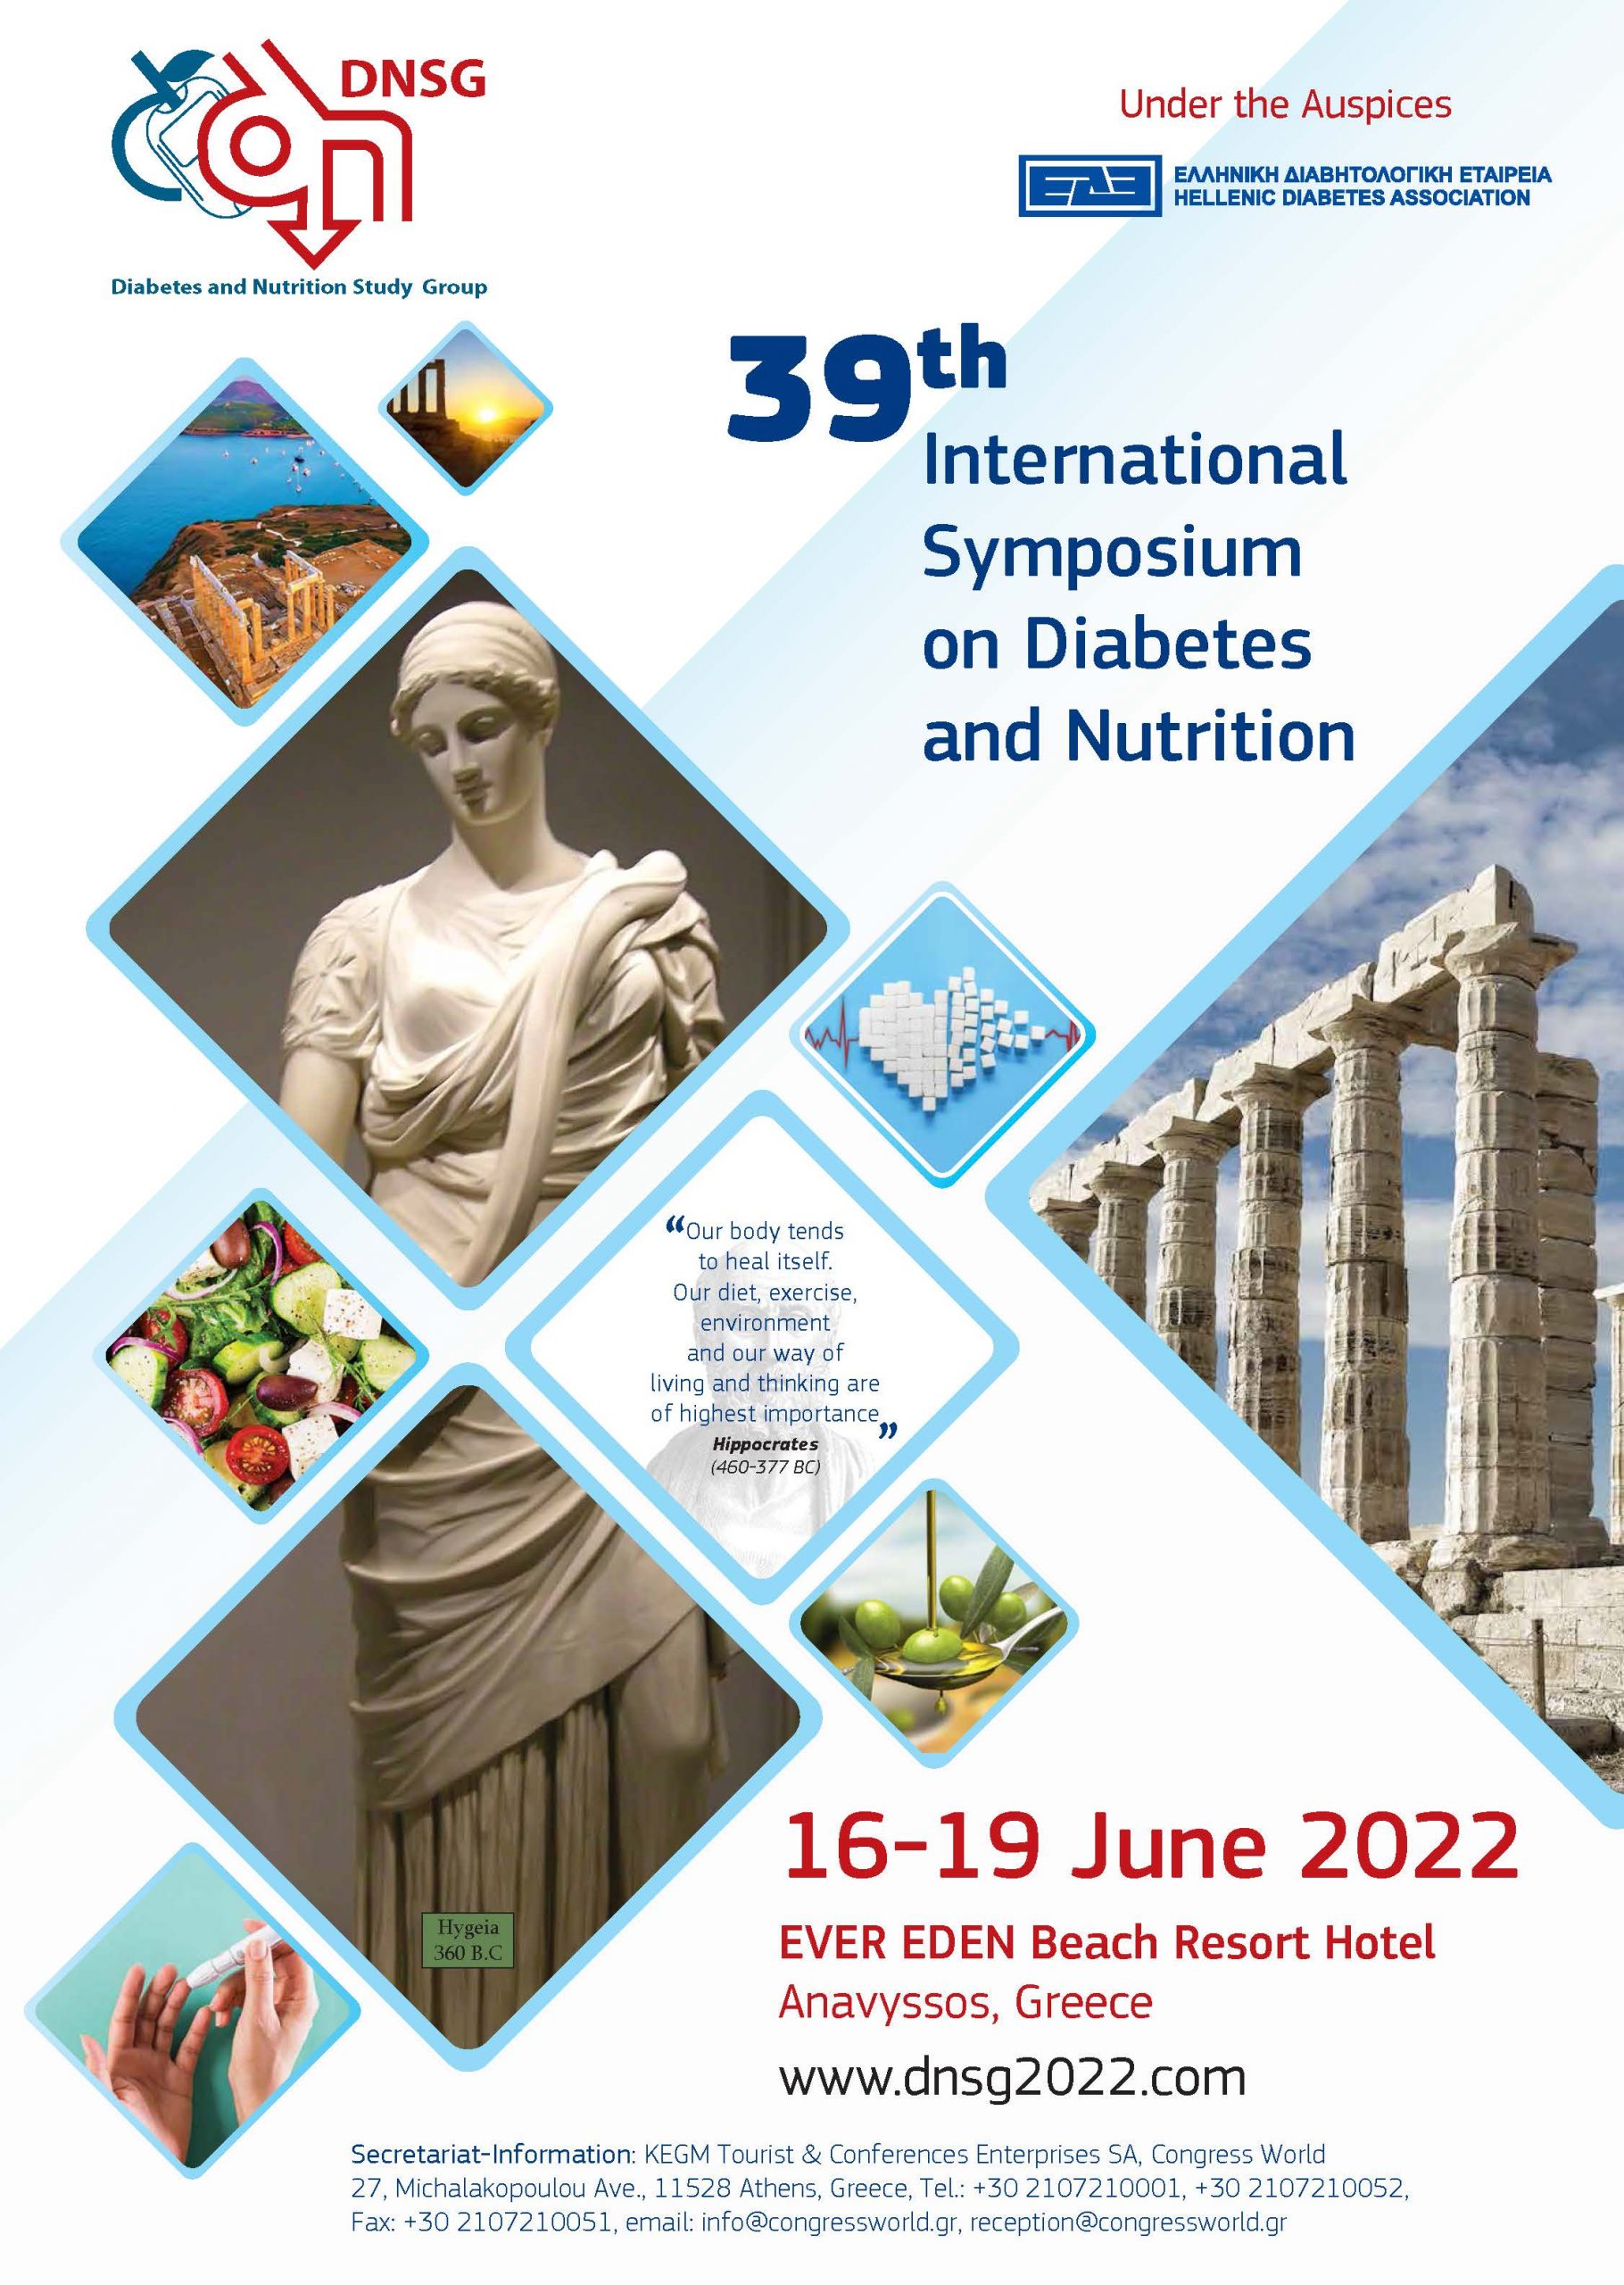 39th International Symposium on Diabetes and Nutrition (16-19 JUNE 2022, Athens)